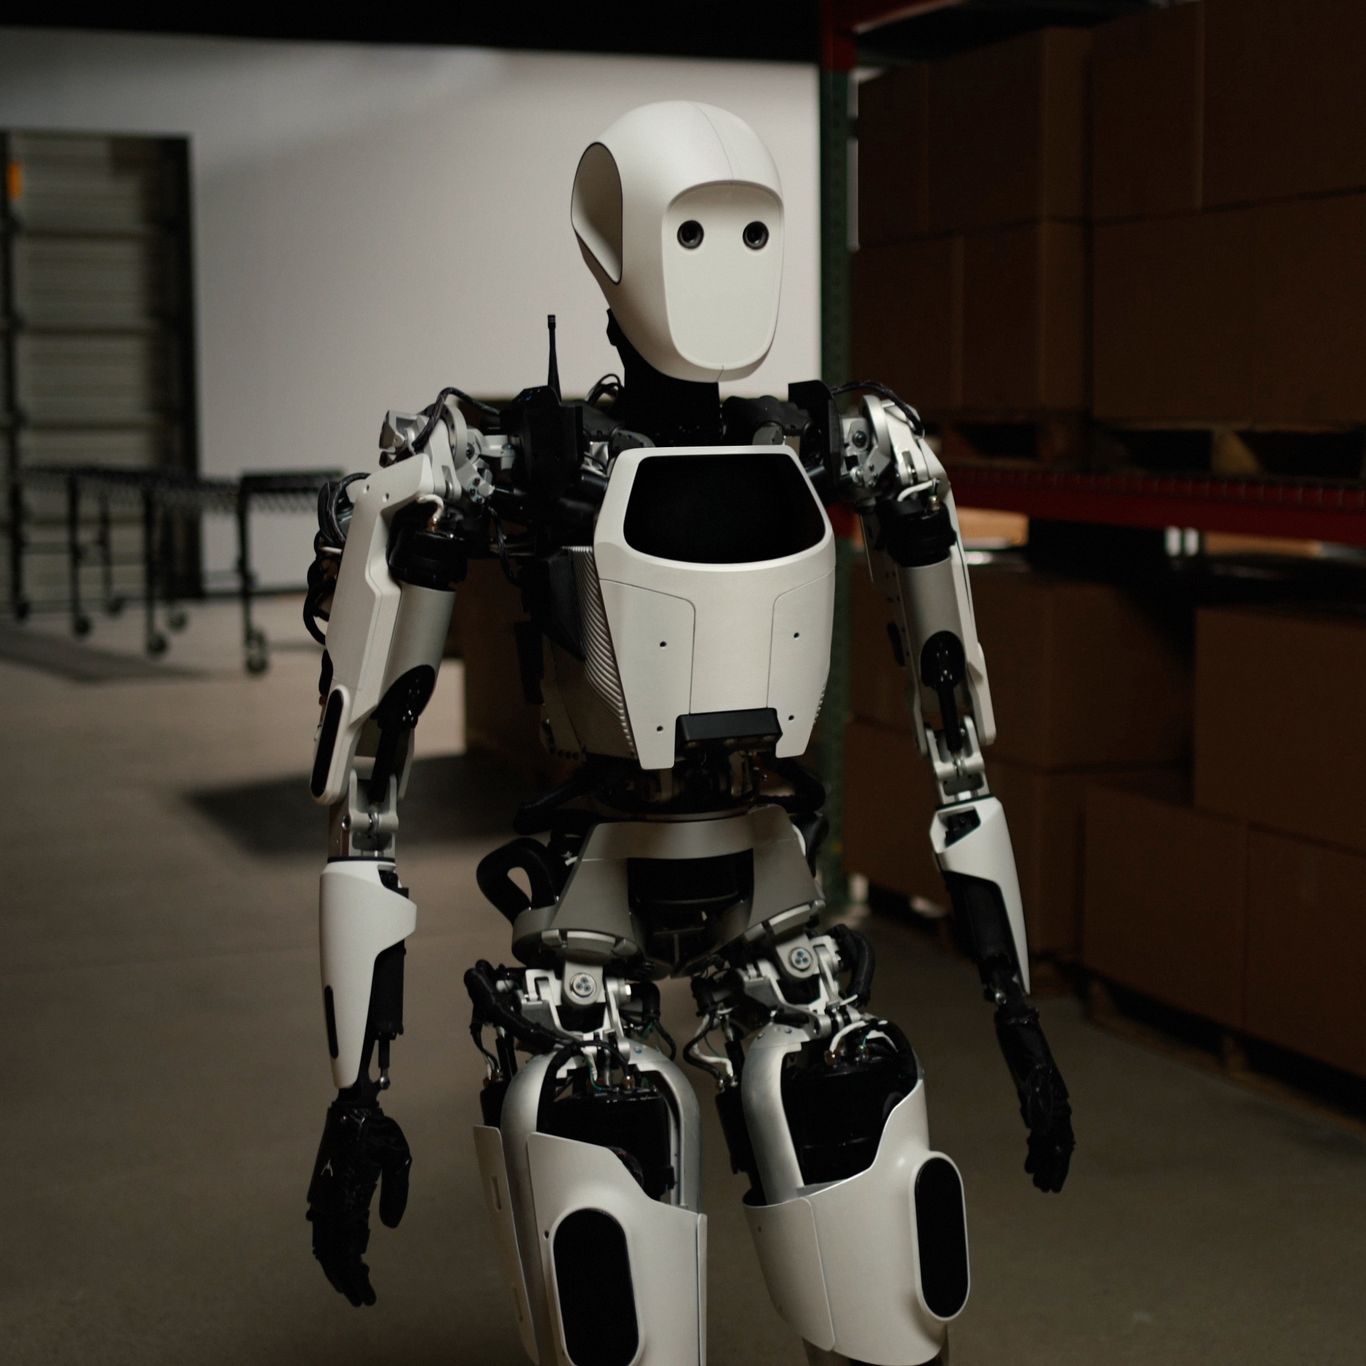 Humanoid robots are already here. But do we really need them and will they  replace humans?